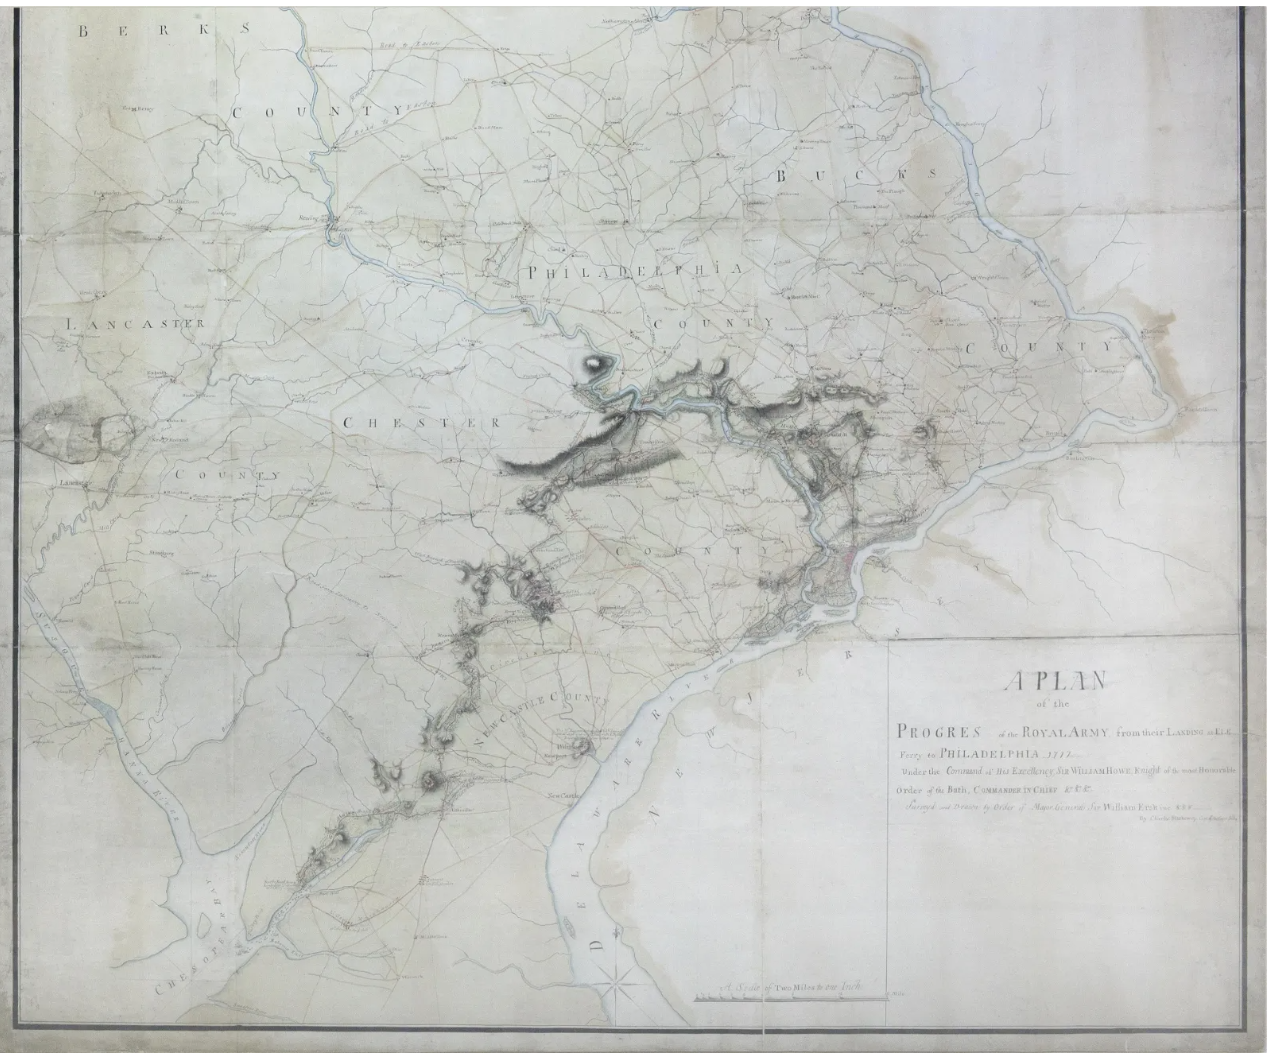 Charles Blaskowitz’s manuscript map is one of only three known monumental campaign headquarters maps from the Philadelphia Campaign of 1777-1778. It attained $625,000 plus the buyer’s premium in January 2022. Image courtesy of Arader Galleries and LiveAuctioneers.